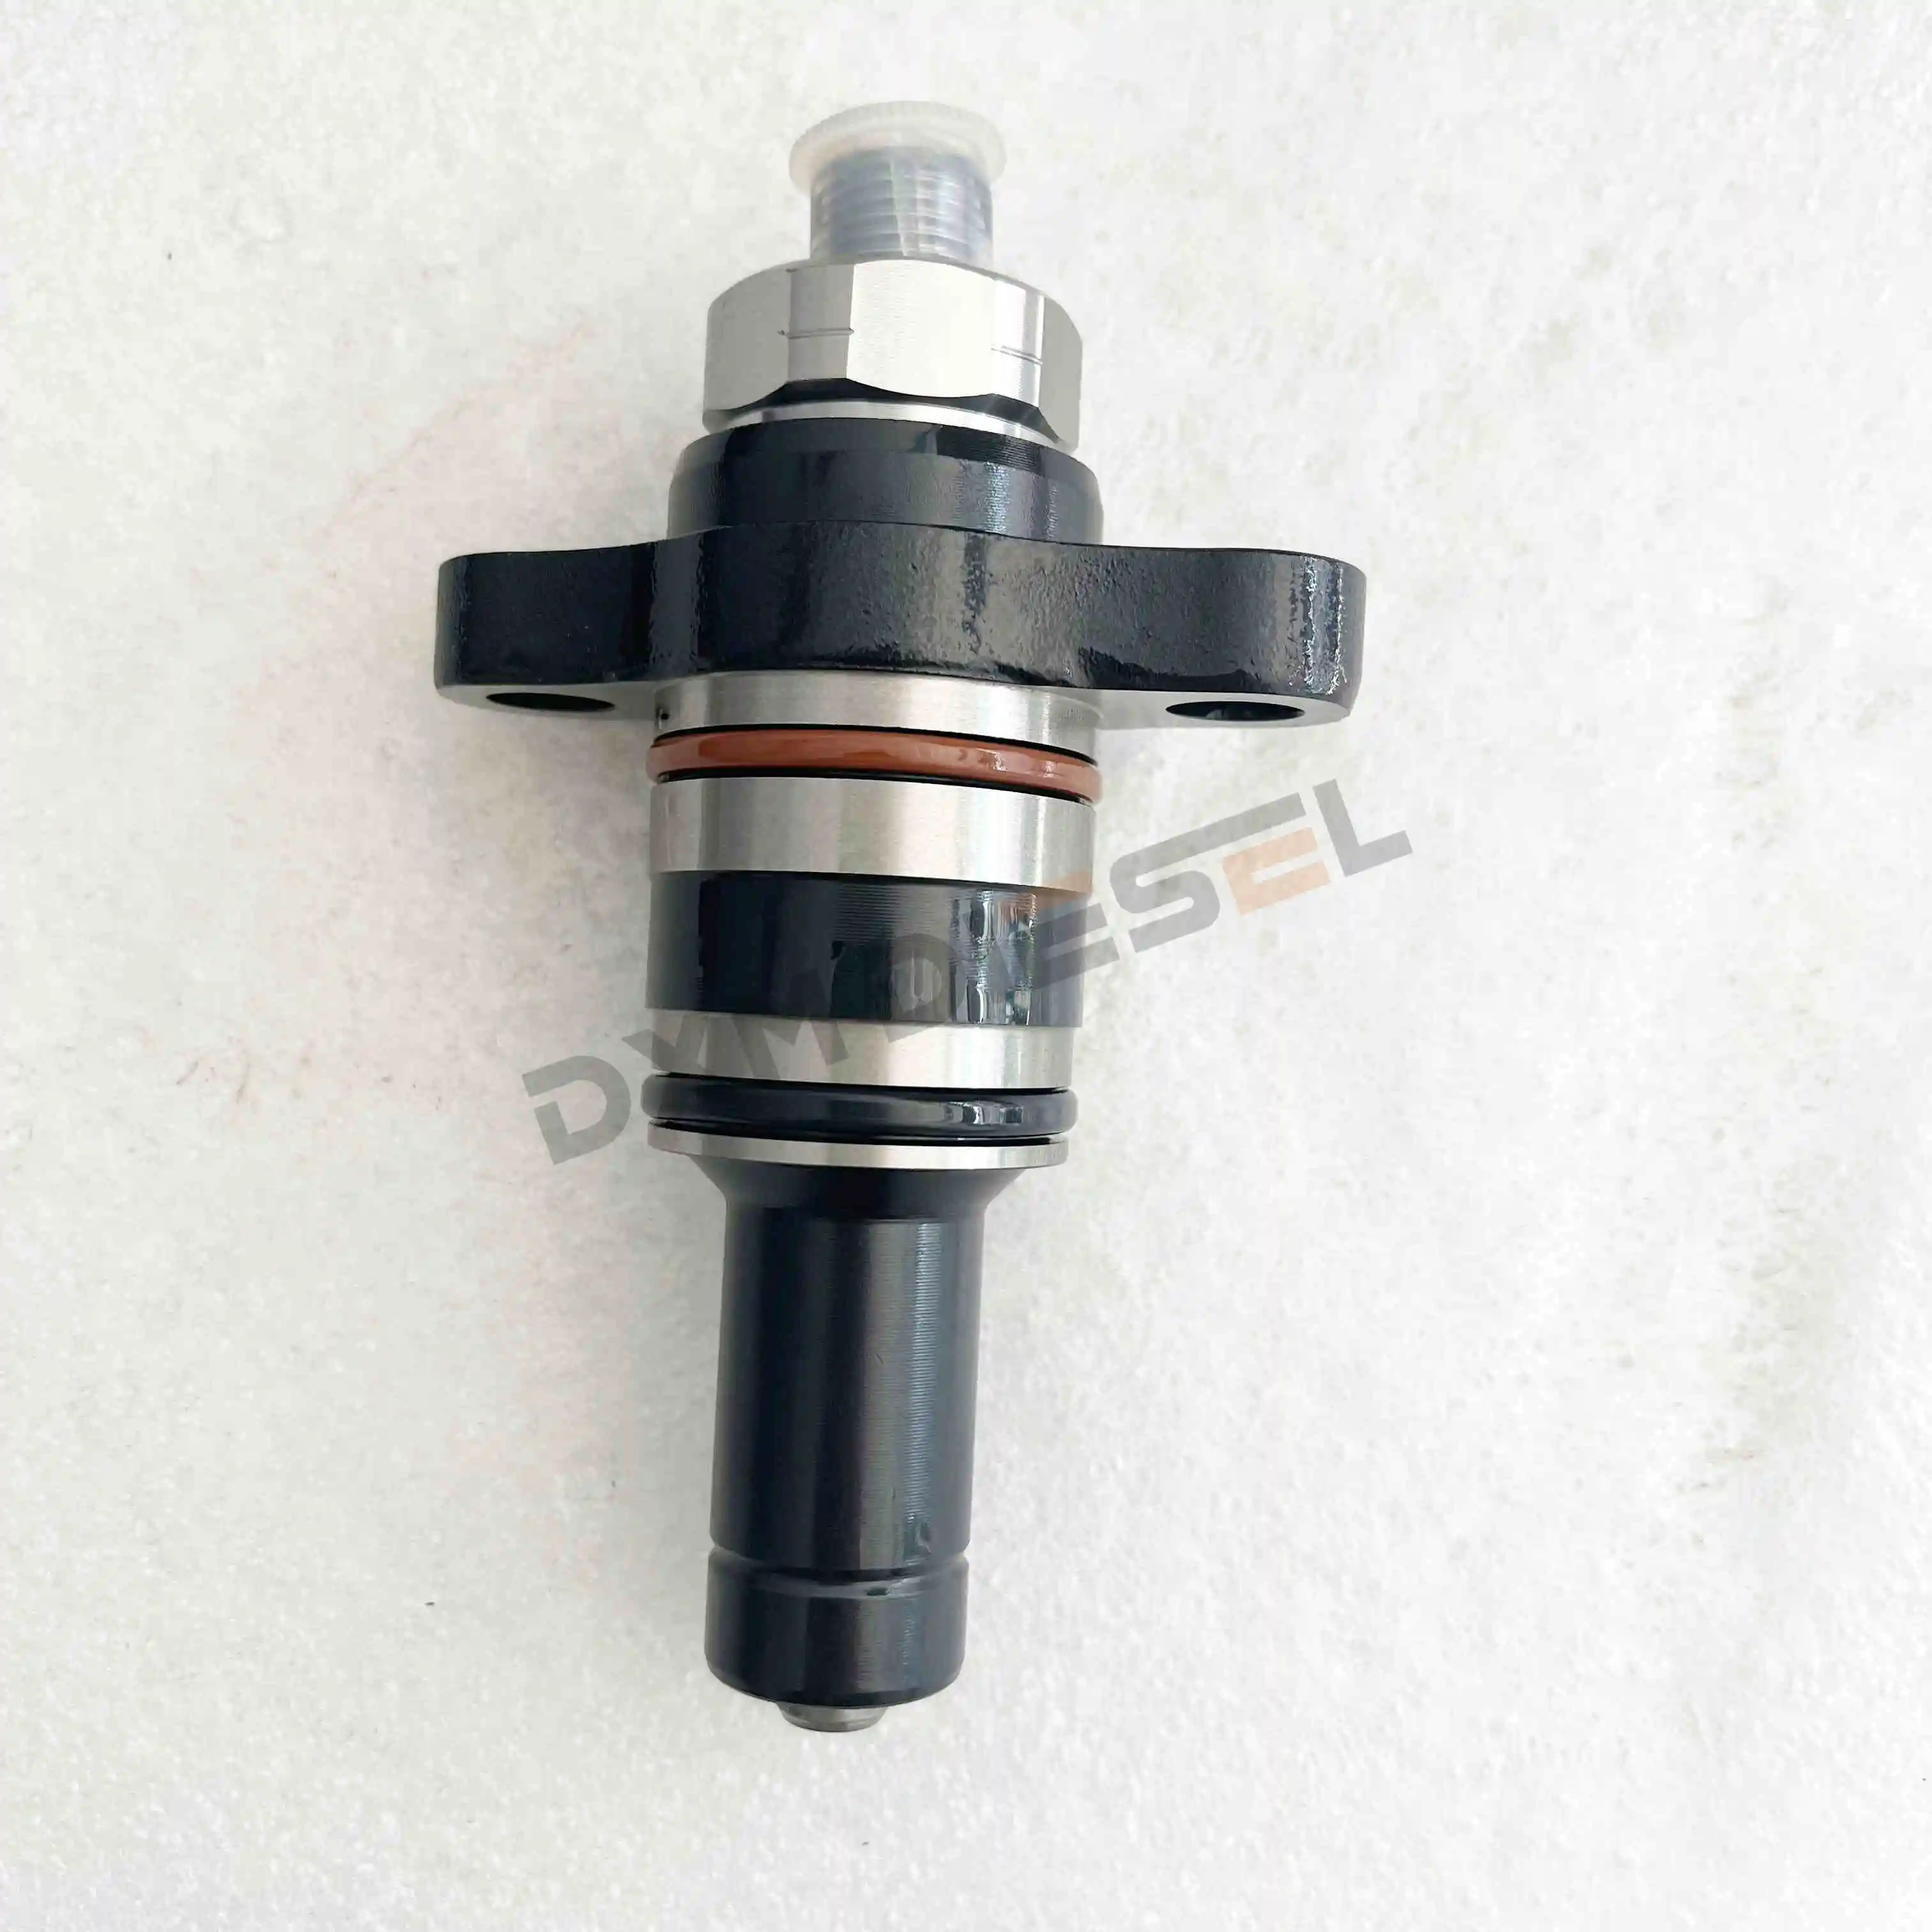 

China Made New F019003313 Plunger For CP2.2 Electric Oil Pump Plunger 1111-010-470-0000BL 13024963 612600080674